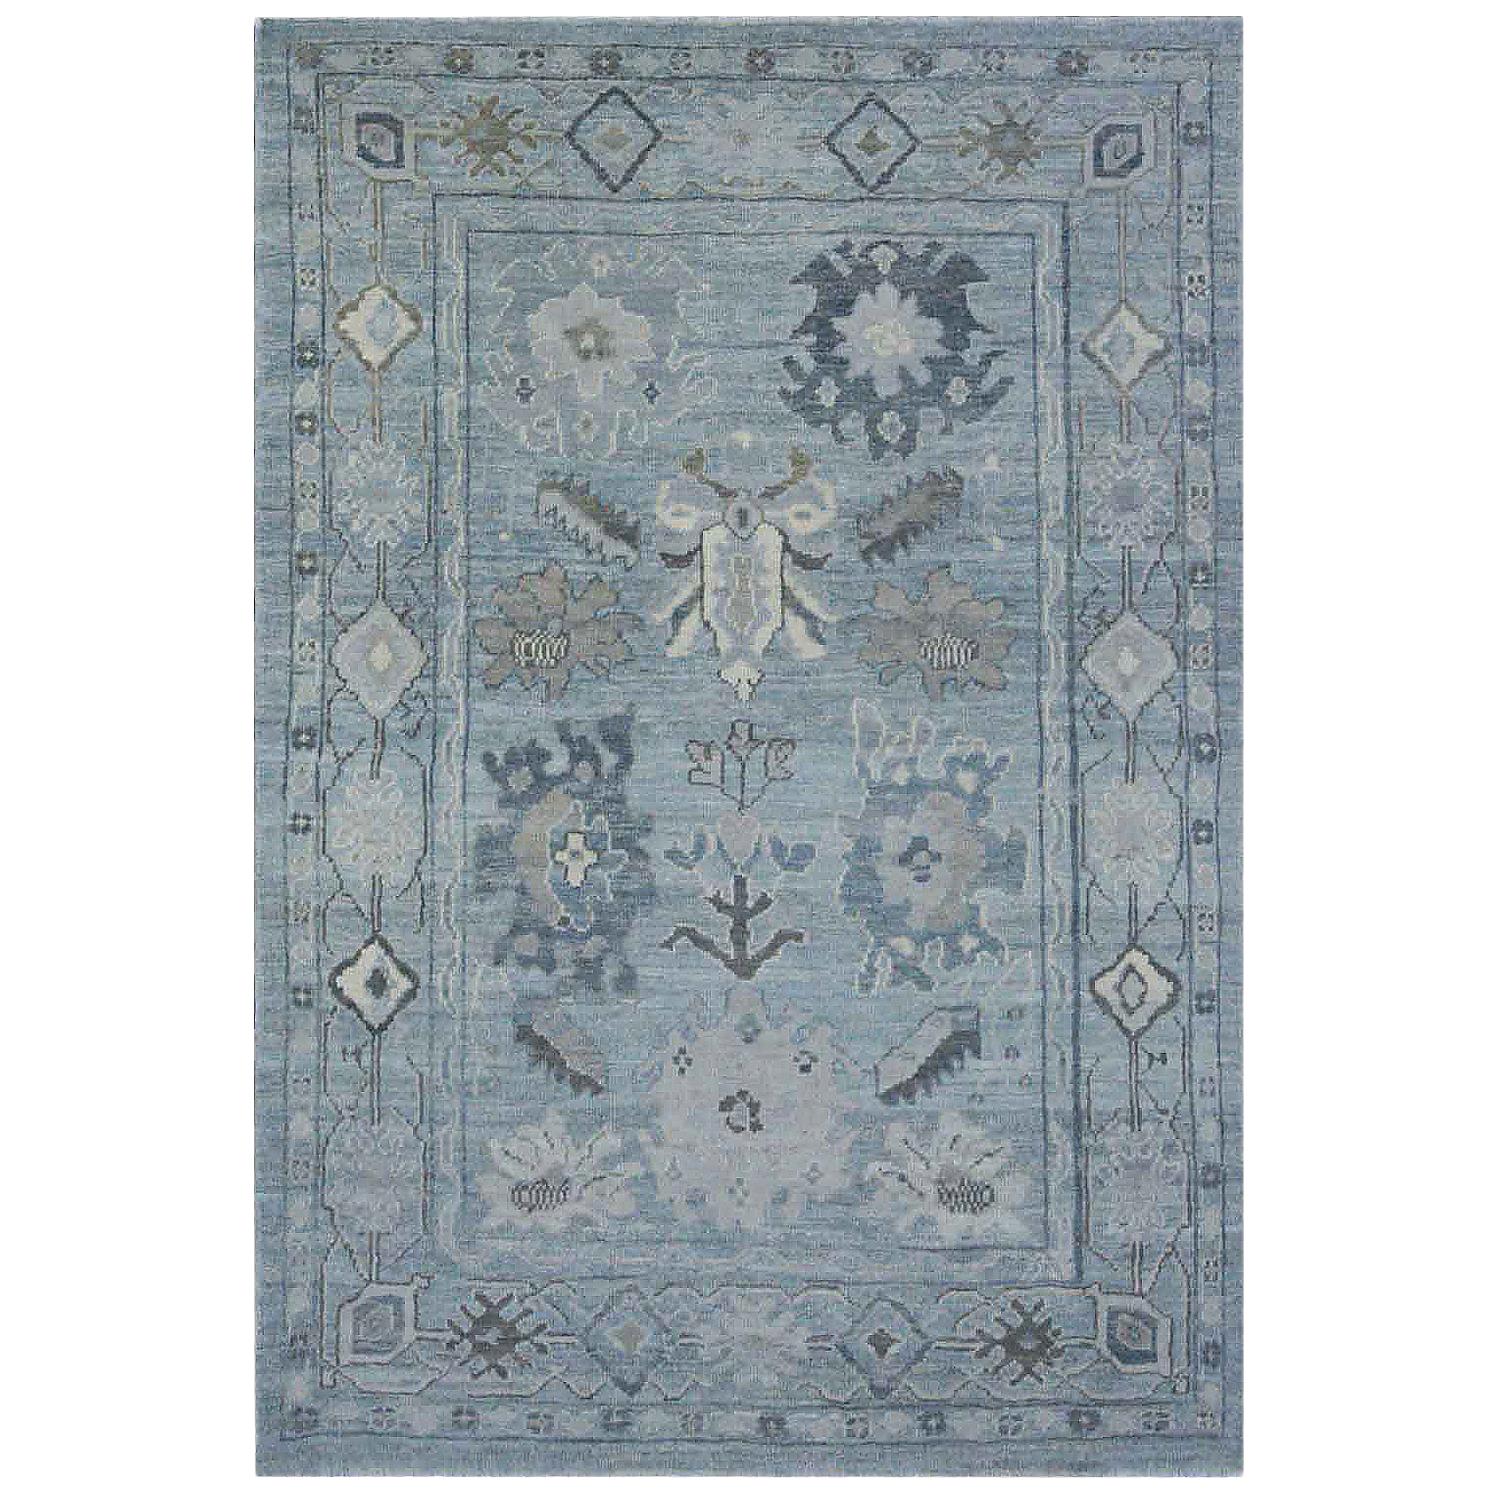 Contemporary Oushak Rug with Floral Details in Navy and Gray on Blue Field